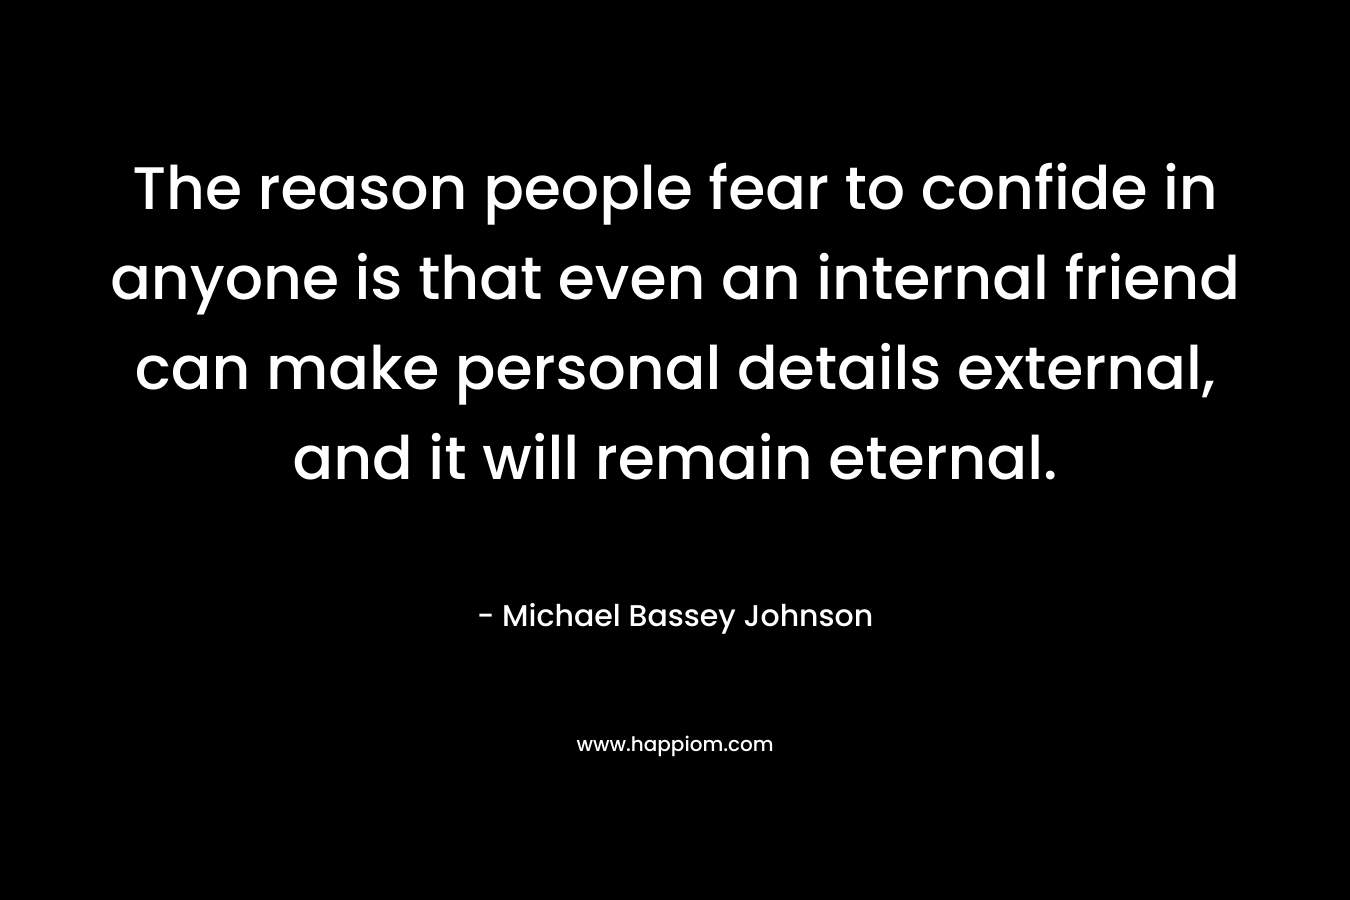 The reason people fear to confide in anyone is that even an internal friend can make personal details external, and it will remain eternal. – Michael Bassey Johnson